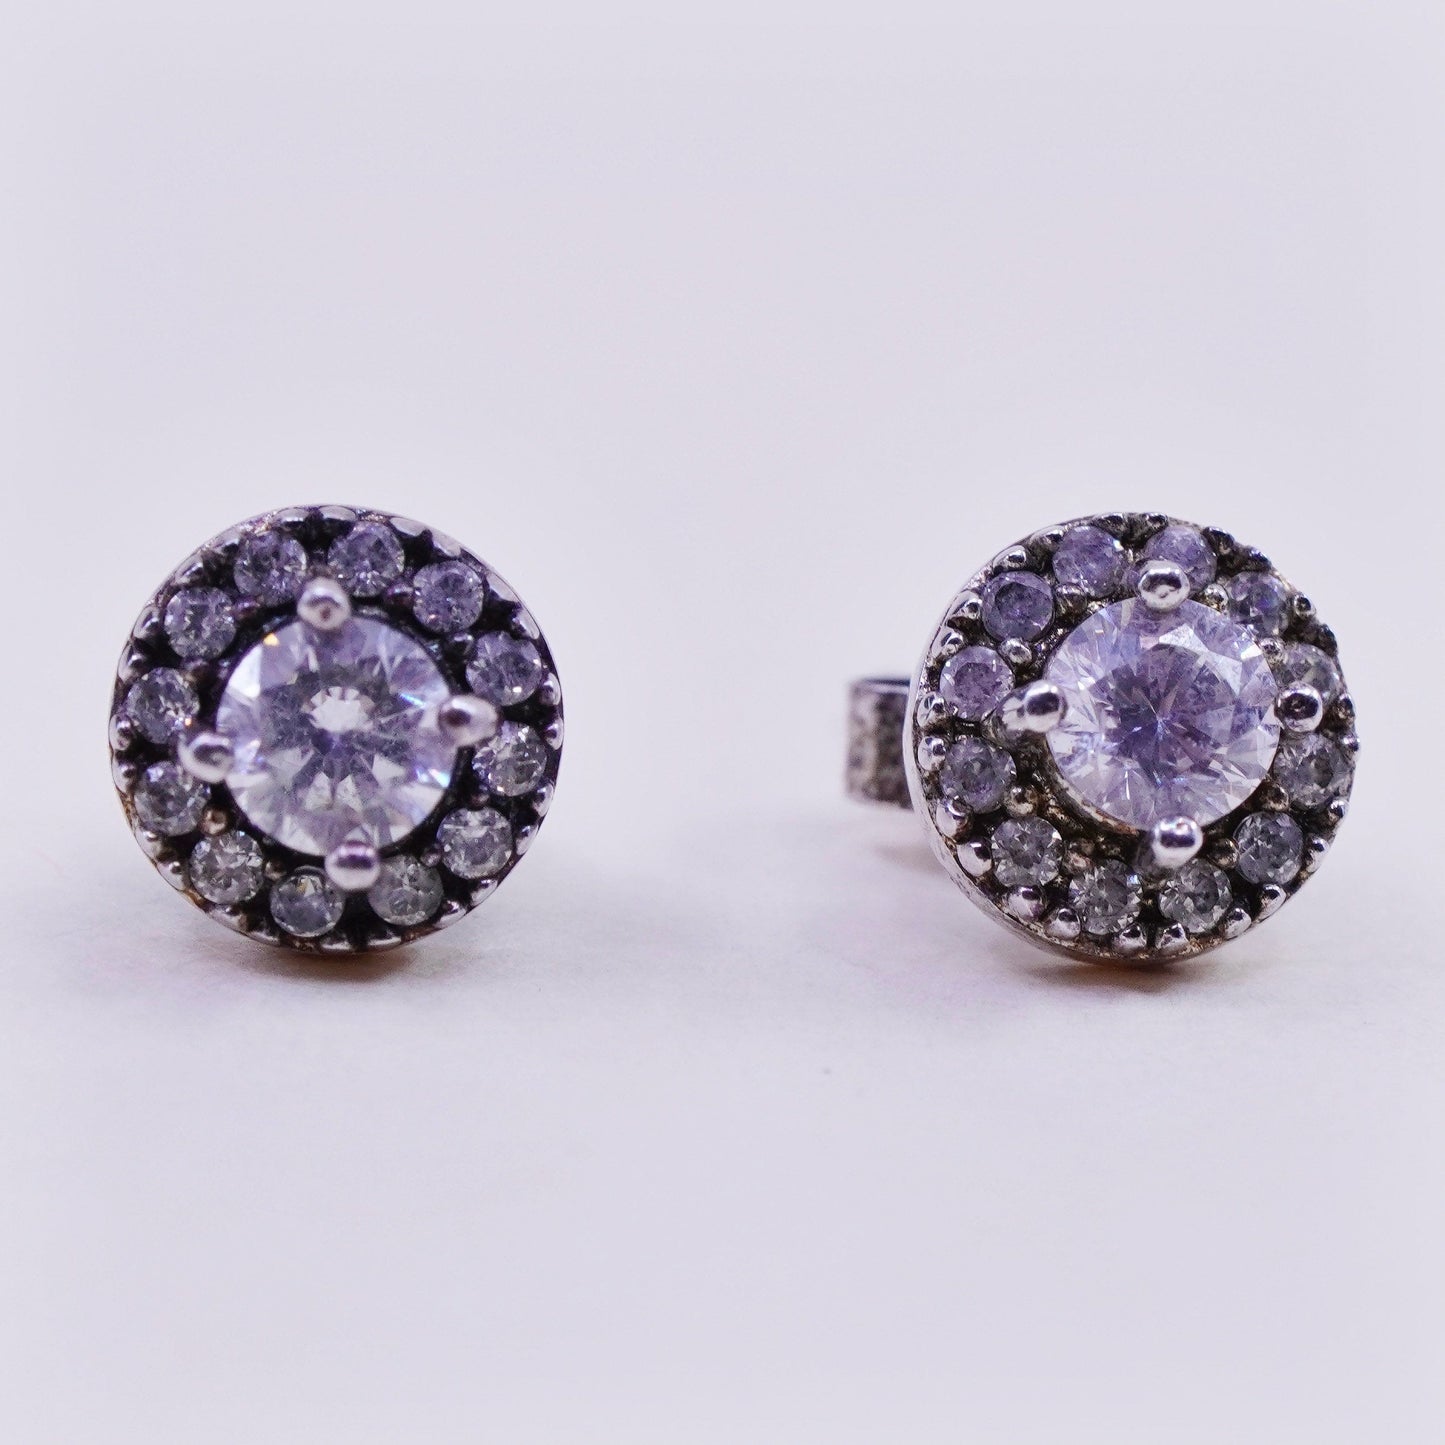 Vintage sterling silver round clear CZ studs, earrings